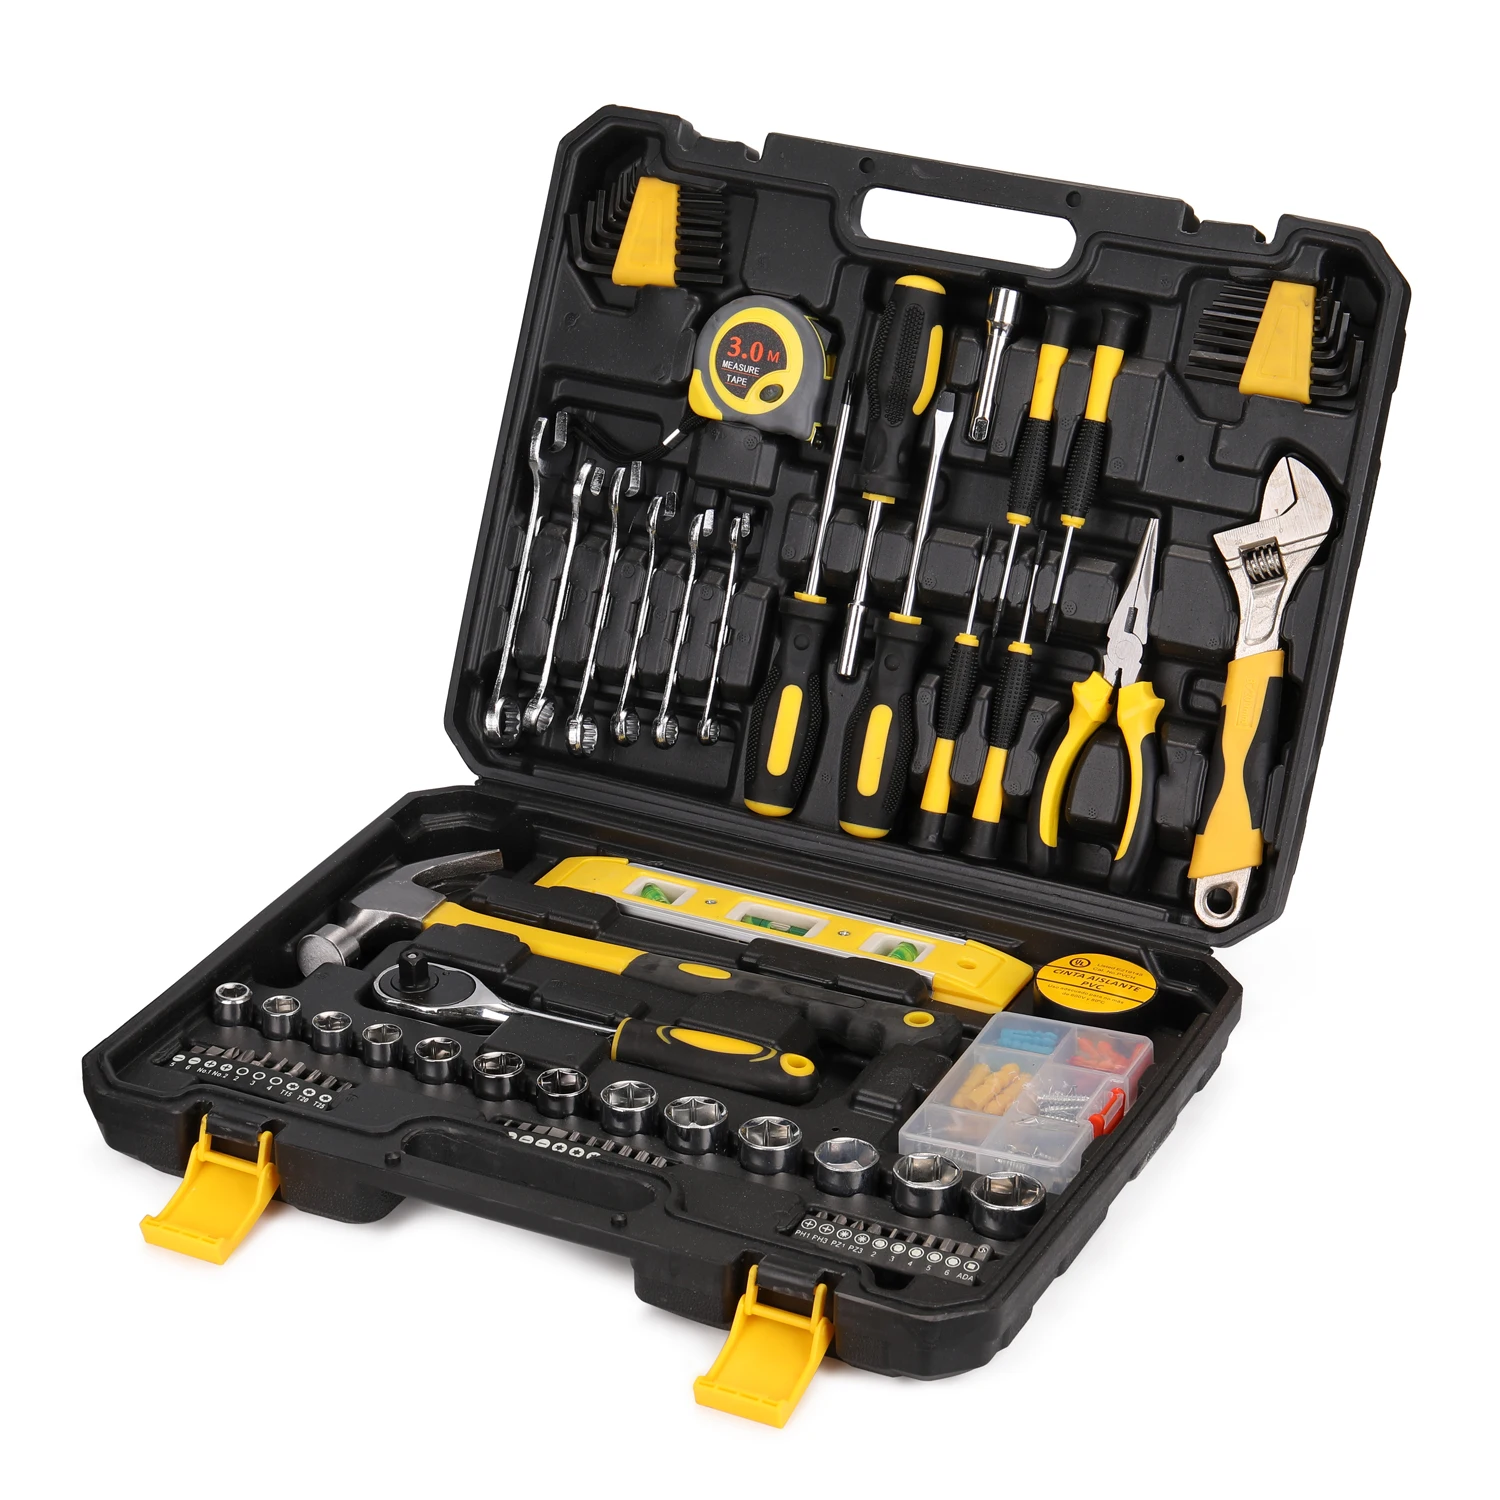 

108pcs Tool Set Household Hardware Hand Tools Combination Auto Repairing Kit Box Wrench Pliers 3.0m Tape Measure Utility Cutter